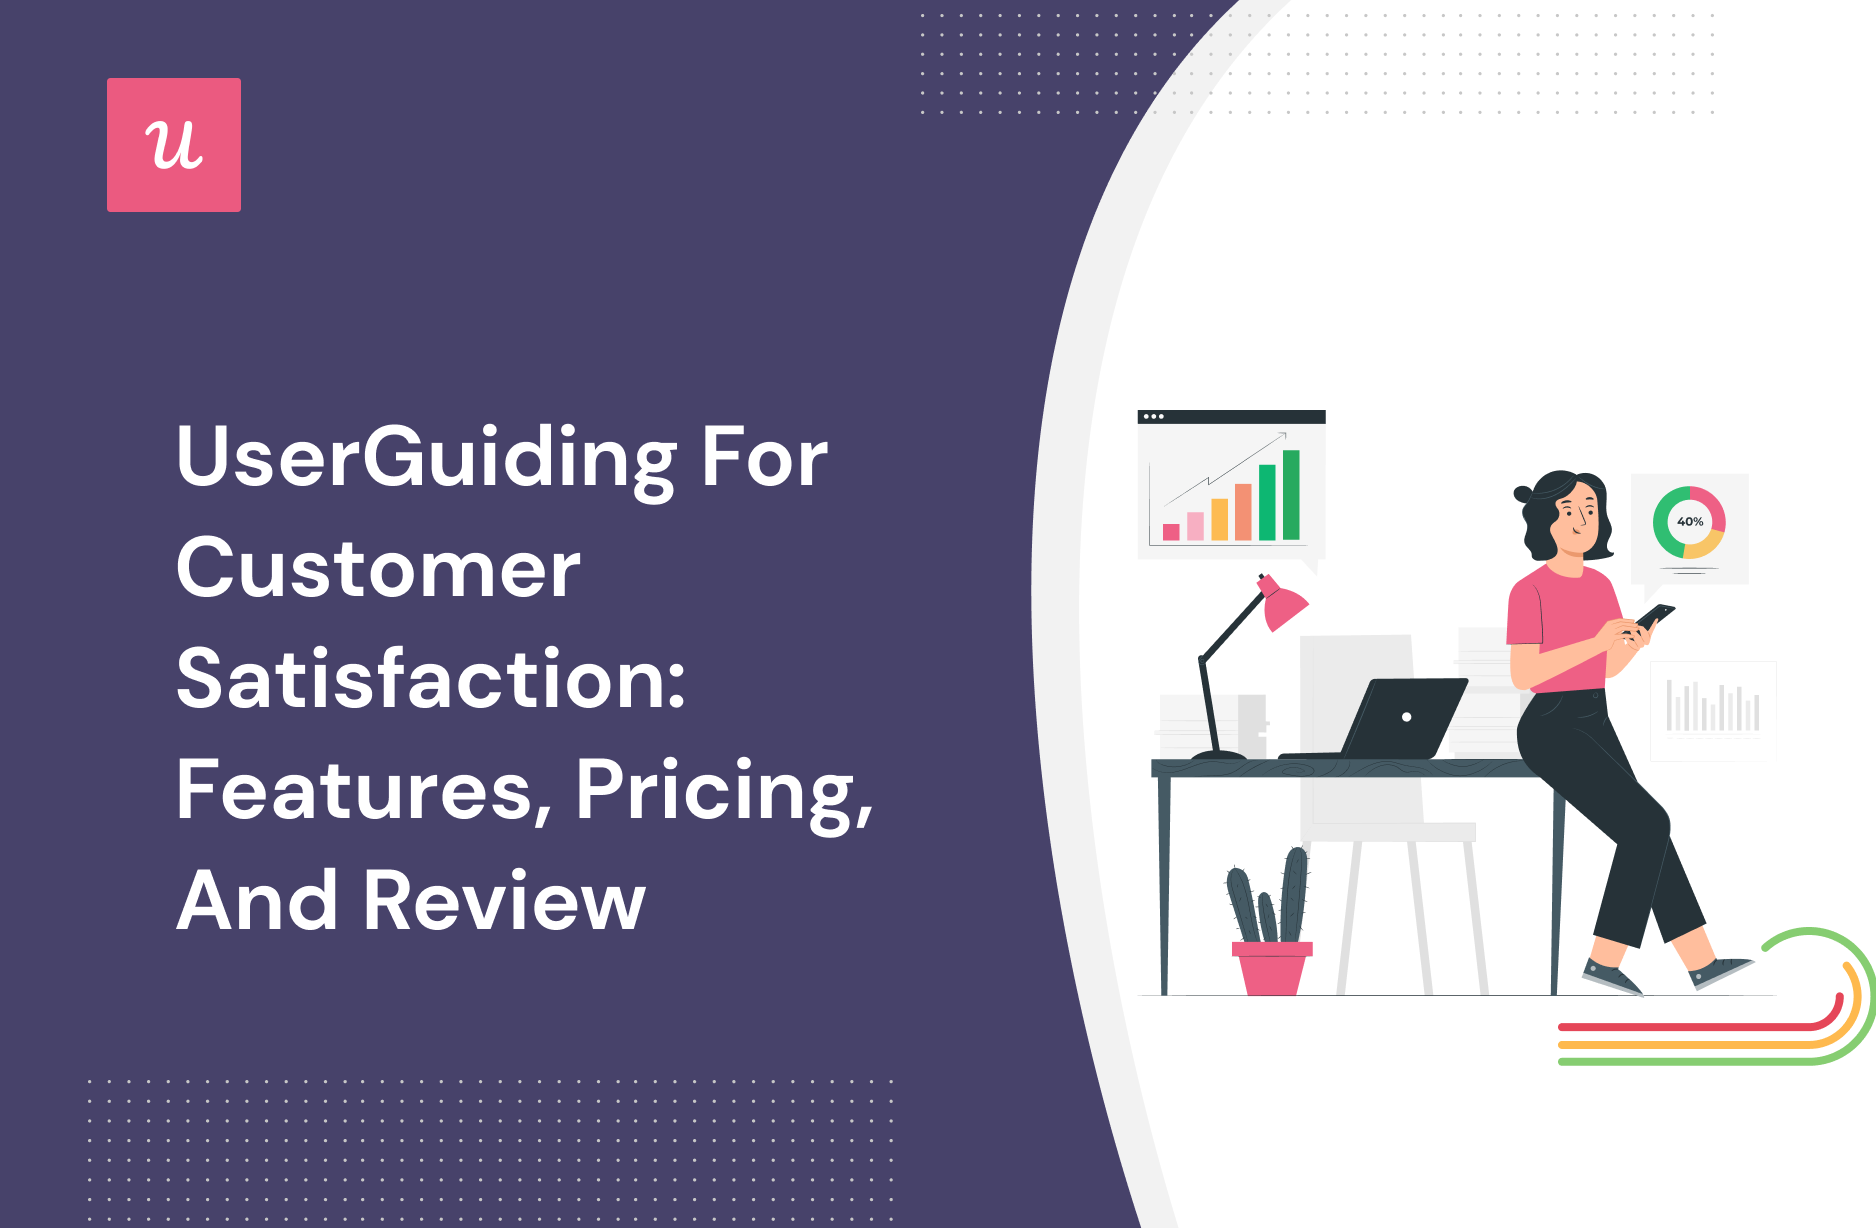 UserGuiding for Customer Satisfaction: Features, Pricing, and Review